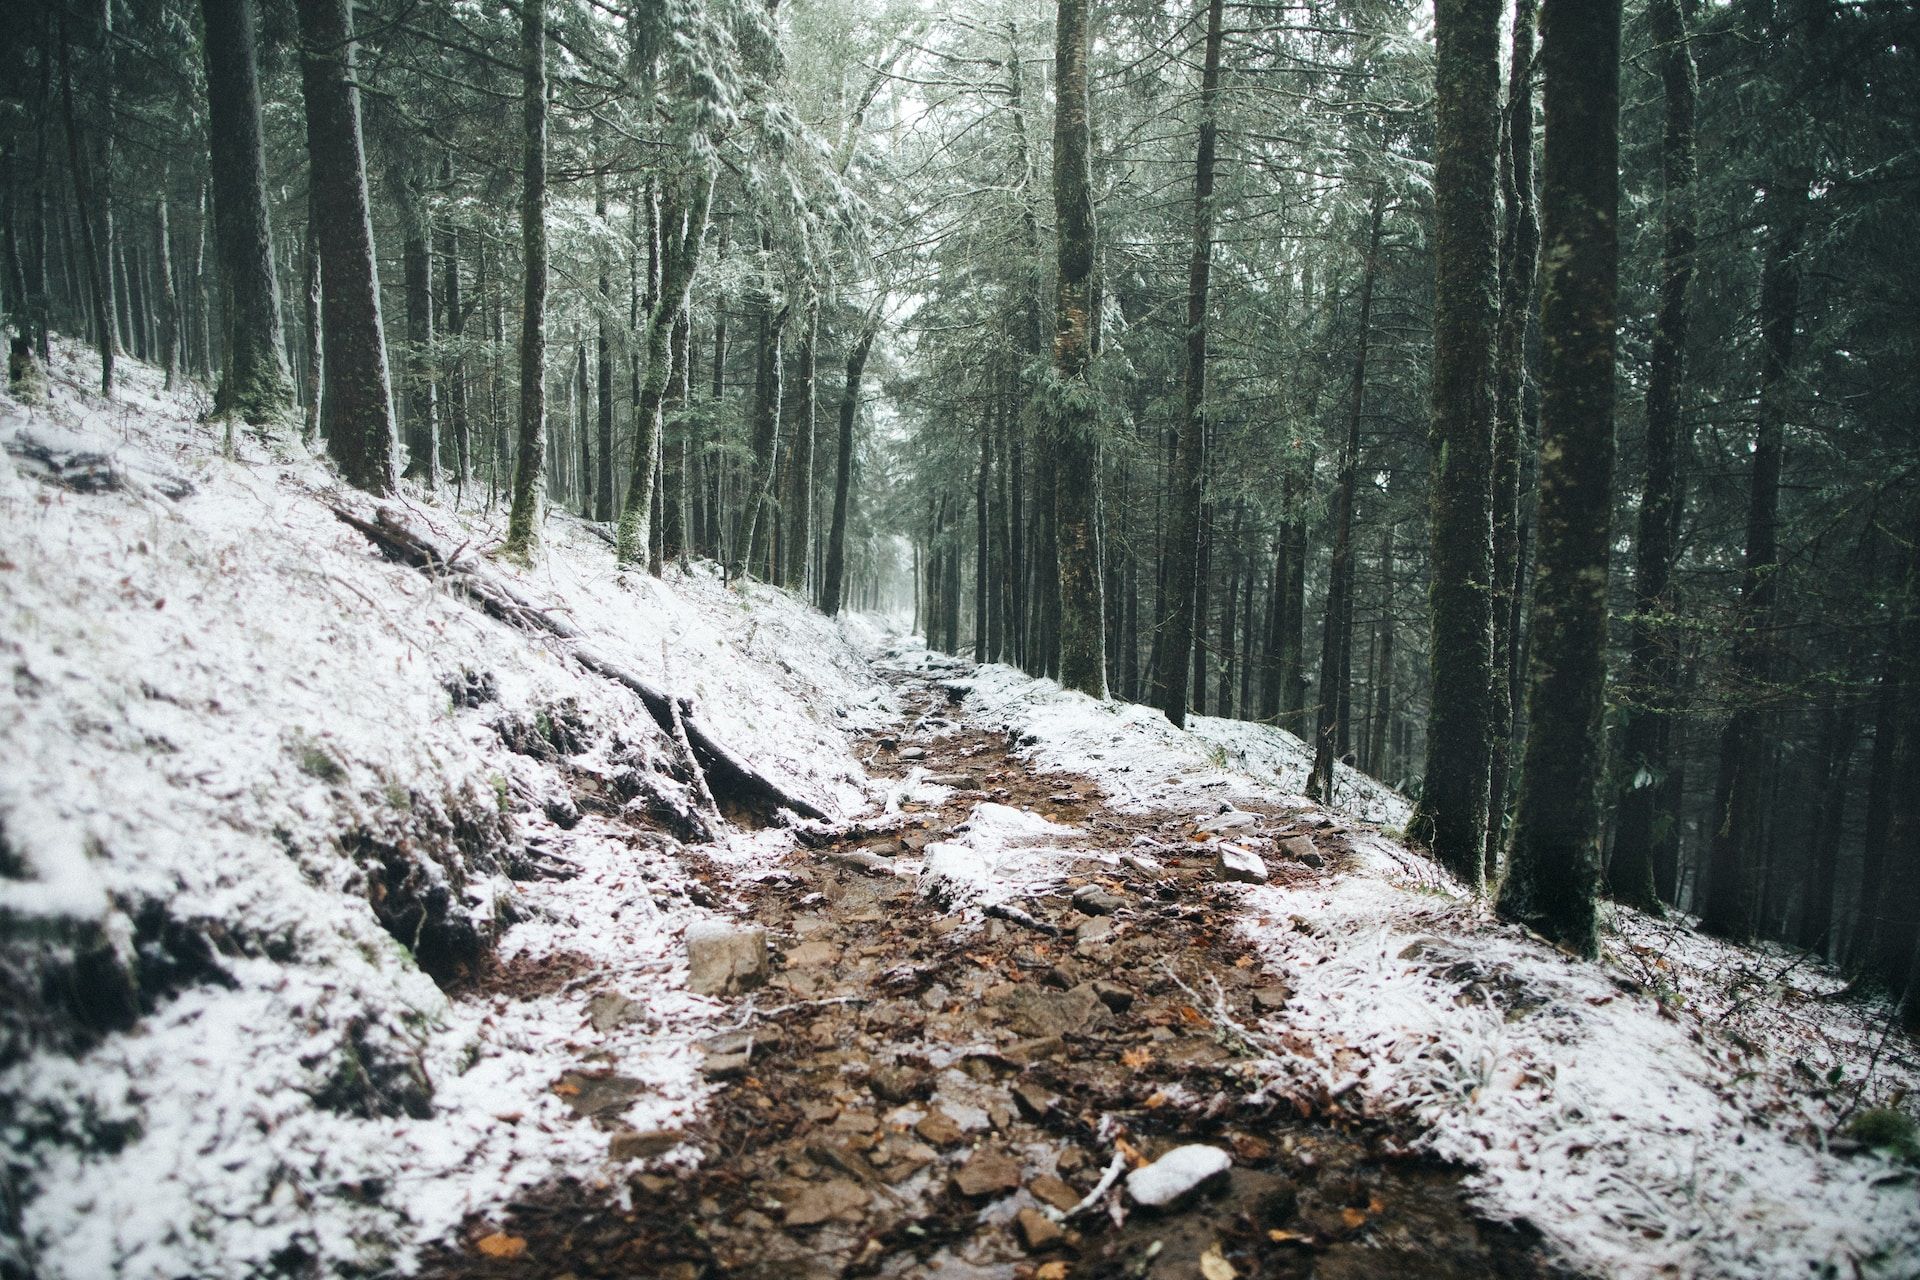 Snowy hiking trail in the Great Smoky Mountains National Park, USA